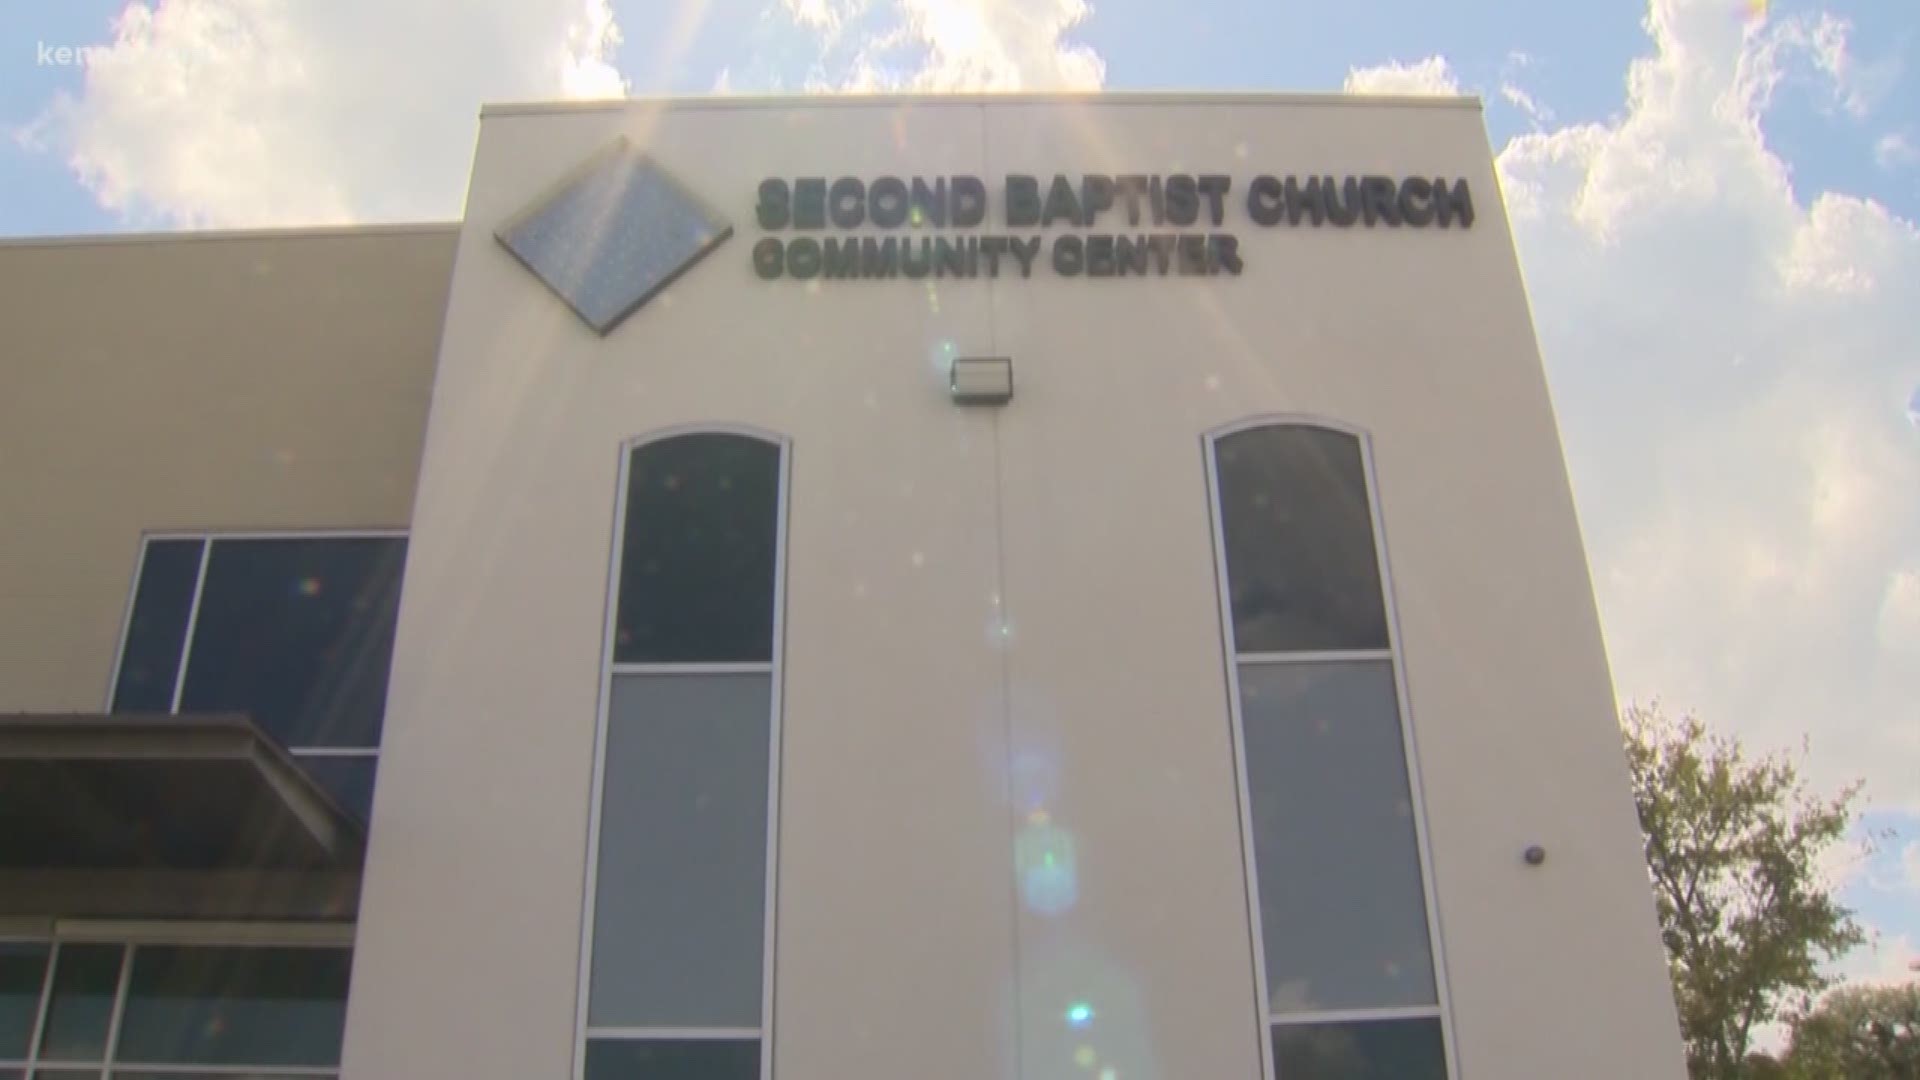 The Second Baptist Church of San Antonio is working to rezone its community center to house a migrant shelter. It's doing this alongside a for-profit company